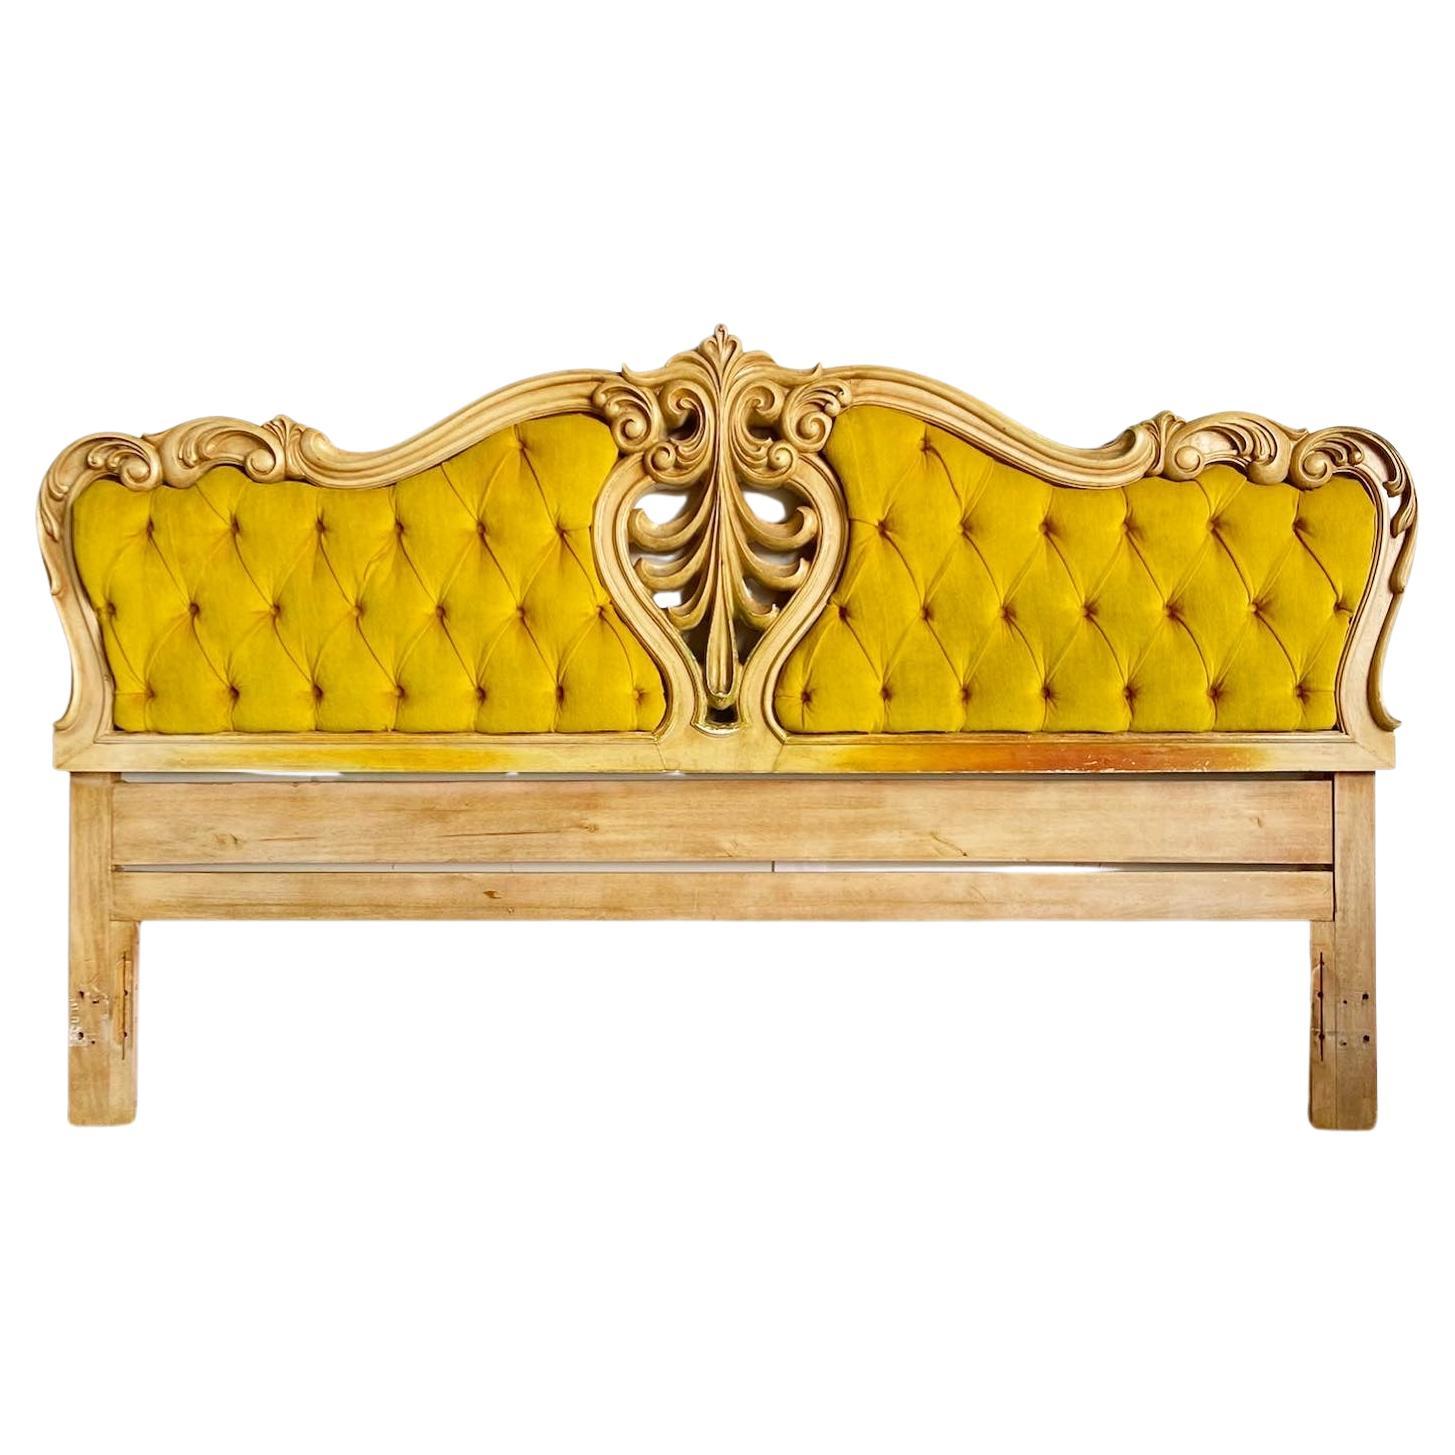 Rococo Style Yellow Tufted King Size Headboard